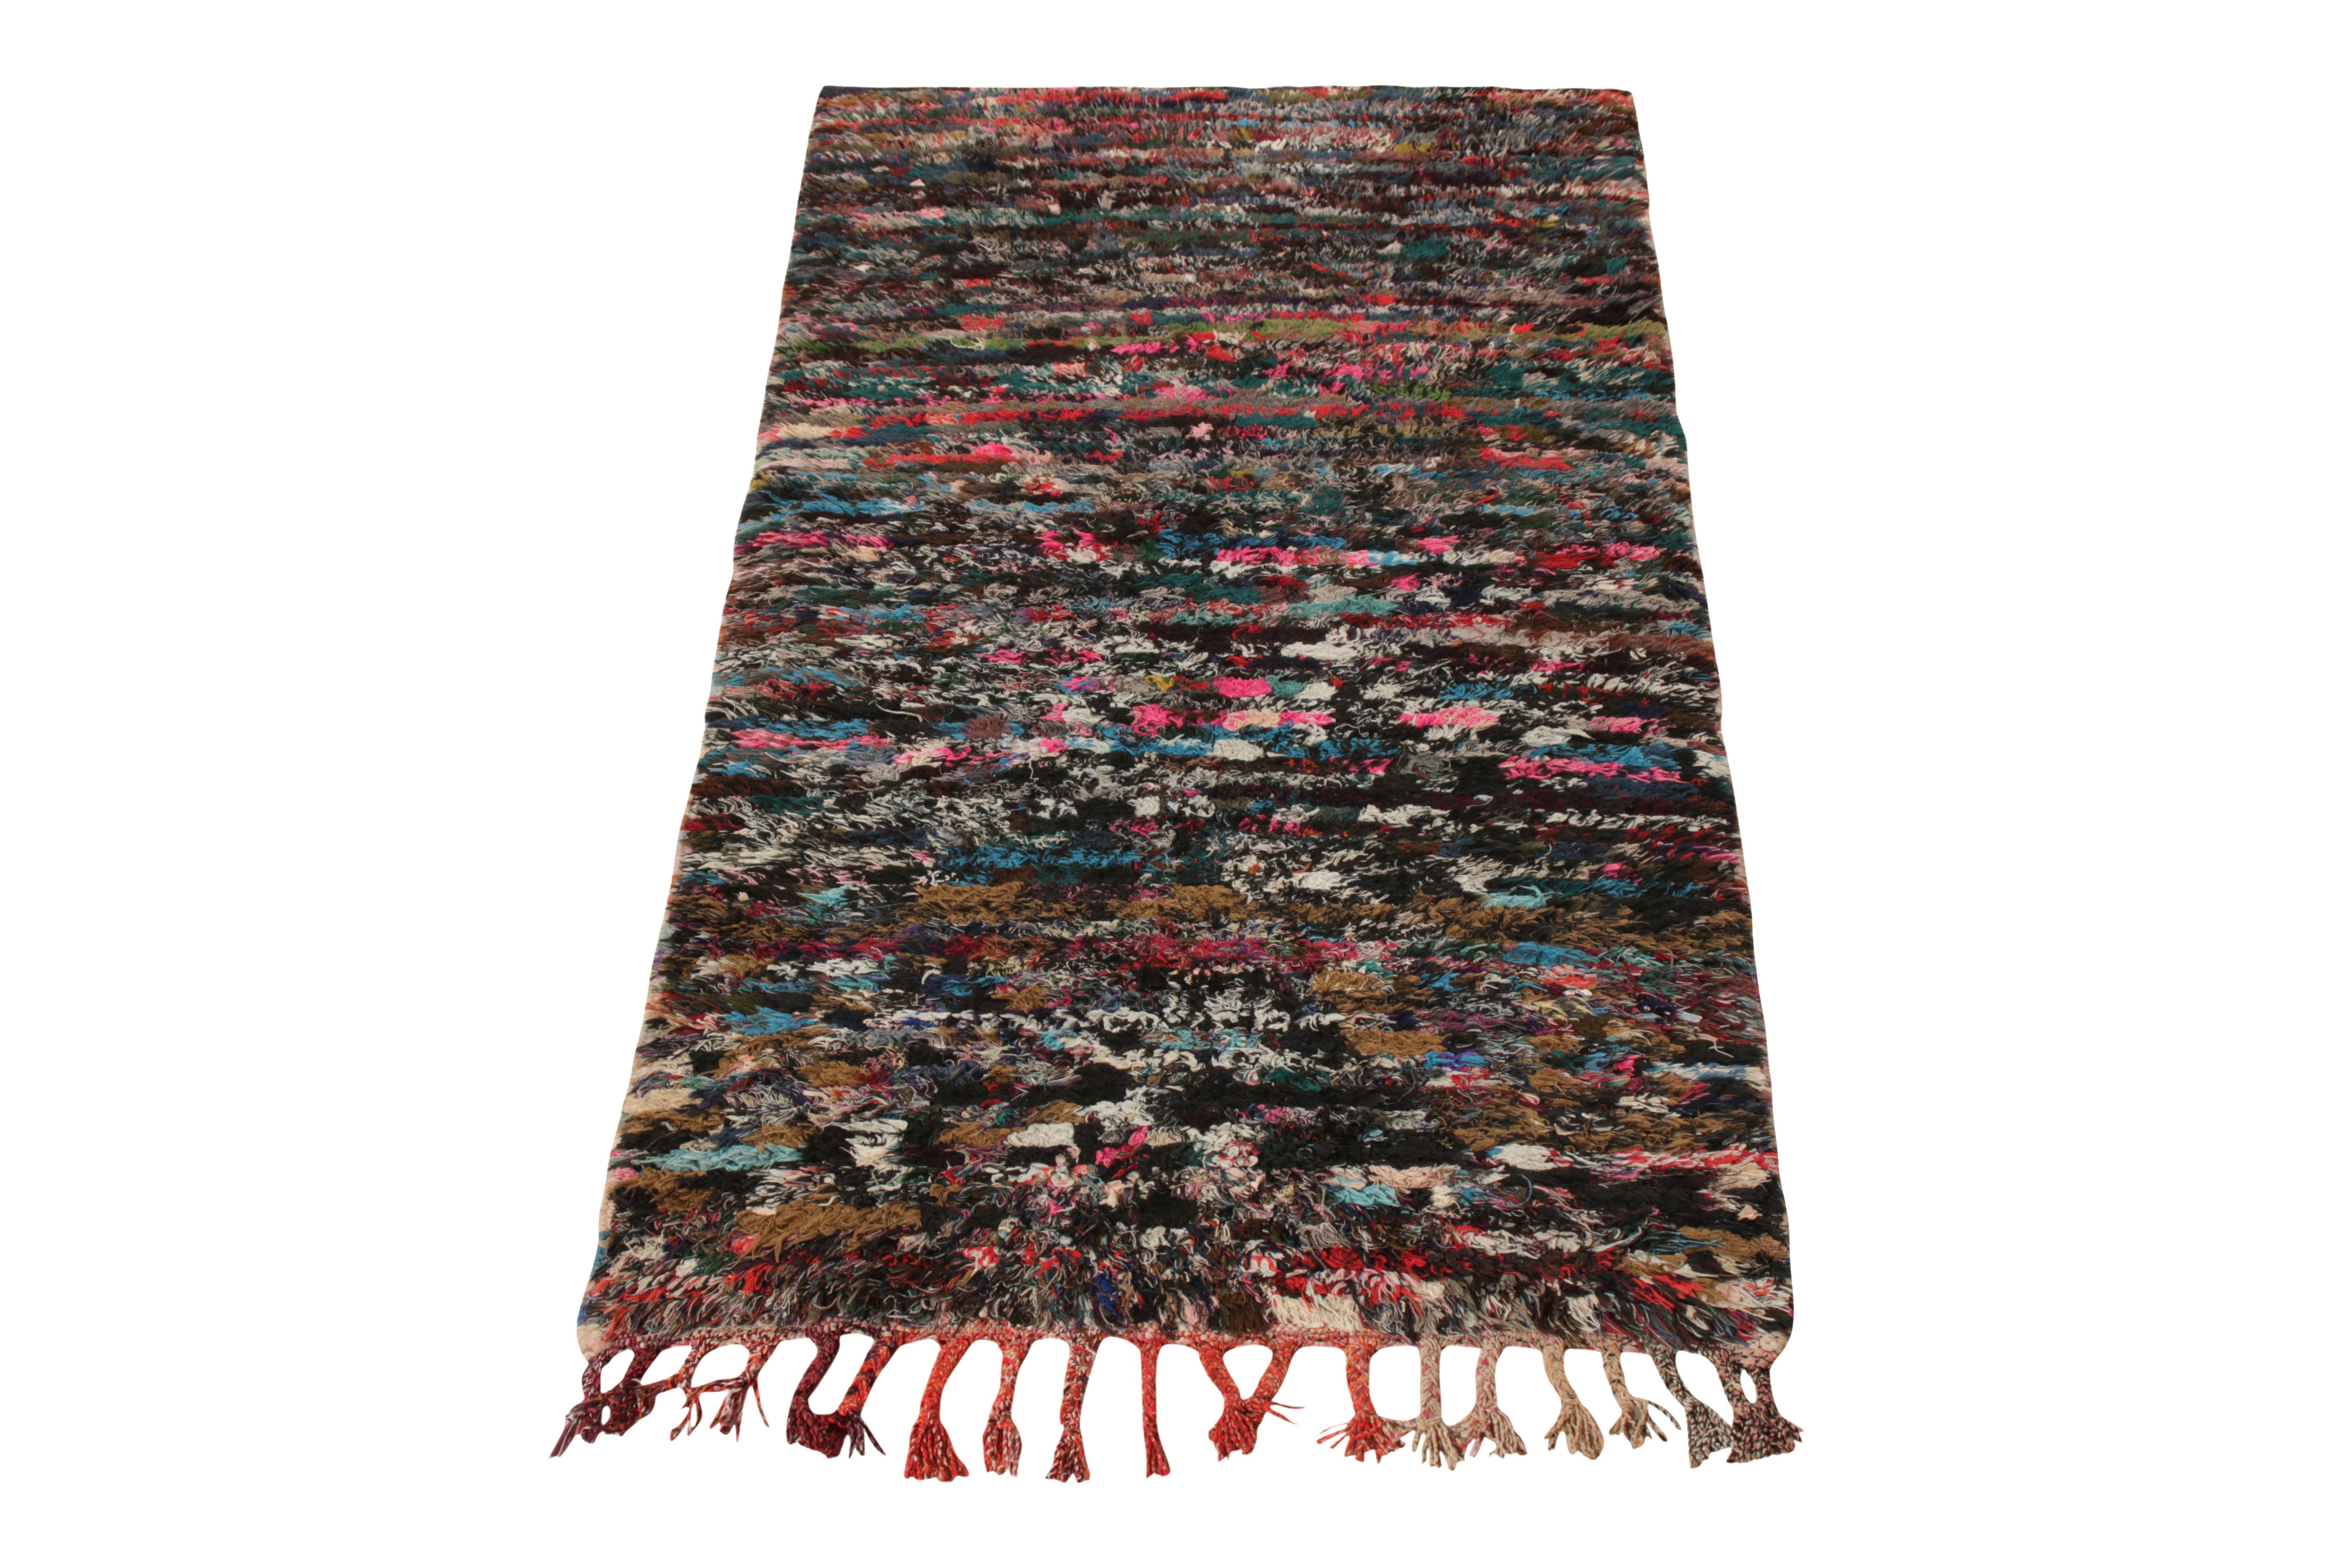 Hand knotted in wool originating from Morocco circa 1950-1960, this 3x5 vintage Boucherite piece from Rug & Kilim’s Moroccan Collection enjoys a tasteful textural sensibility along with a multicolour striation across the scale. Dominating shades of